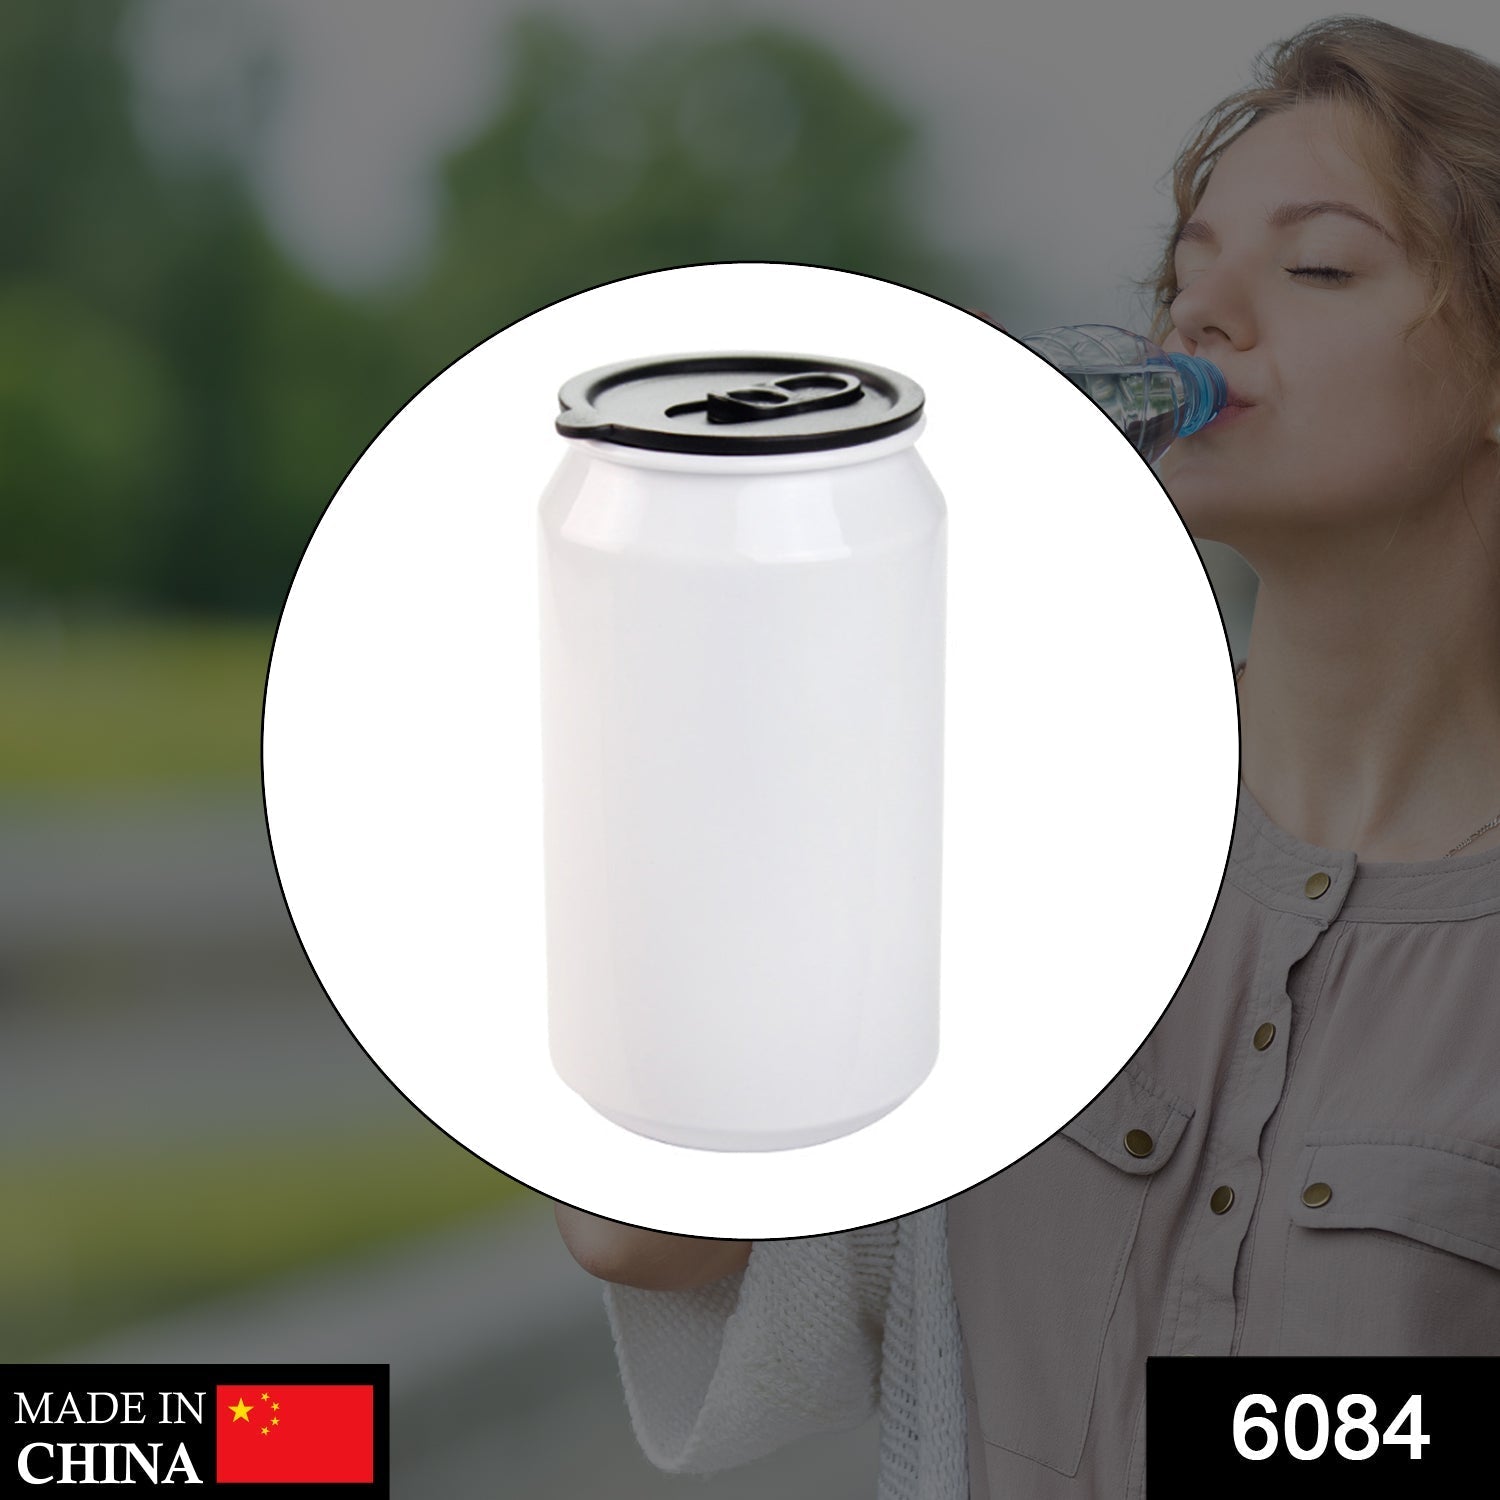 6084 CNB Bottle 3 used in all kinds of places like household and official for storing and drinking water and some beverages etc. DeoDap